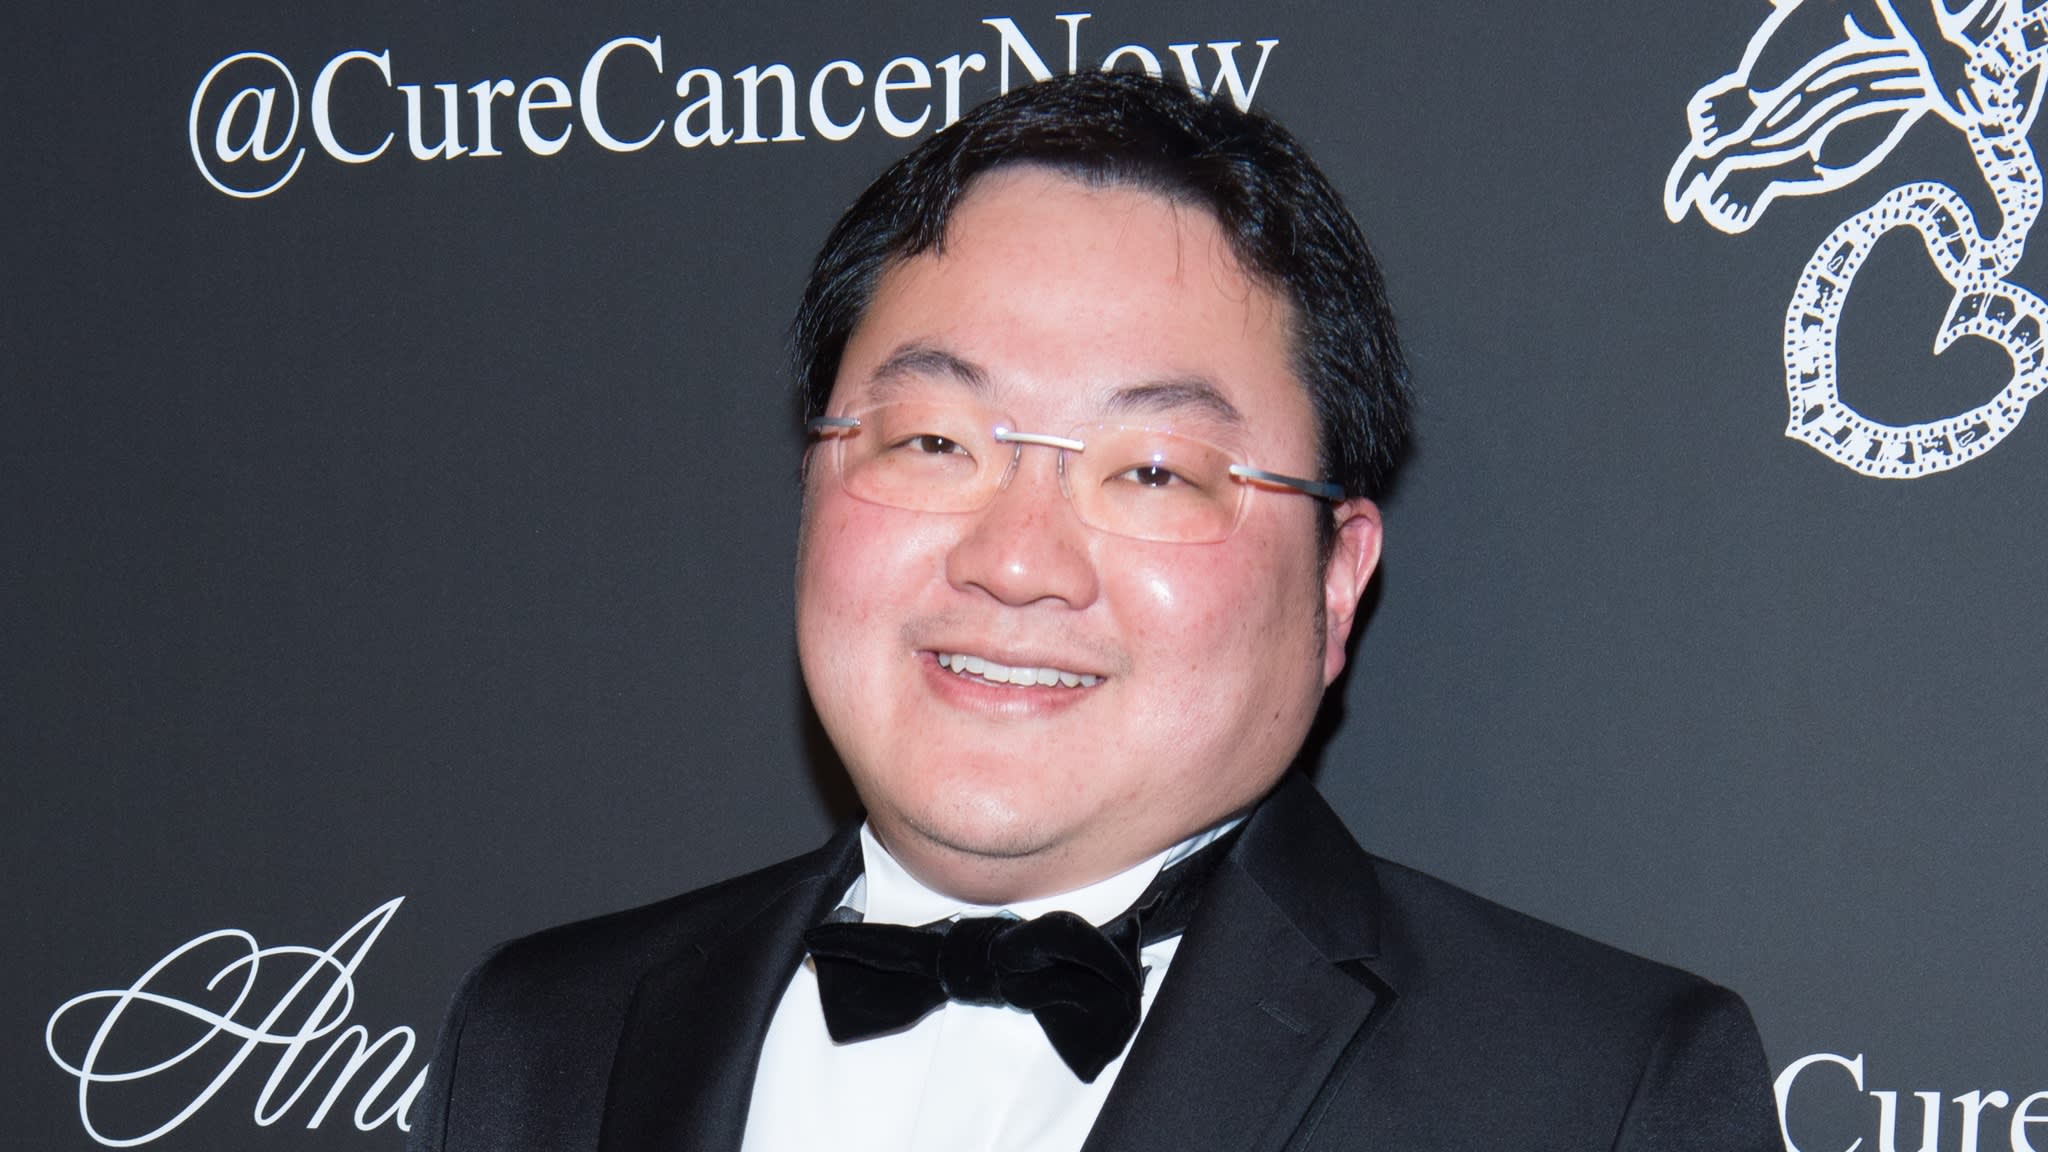 US DoJ reaches deal with Jho Low to recover over US$700 mln linked to 1MDB funds